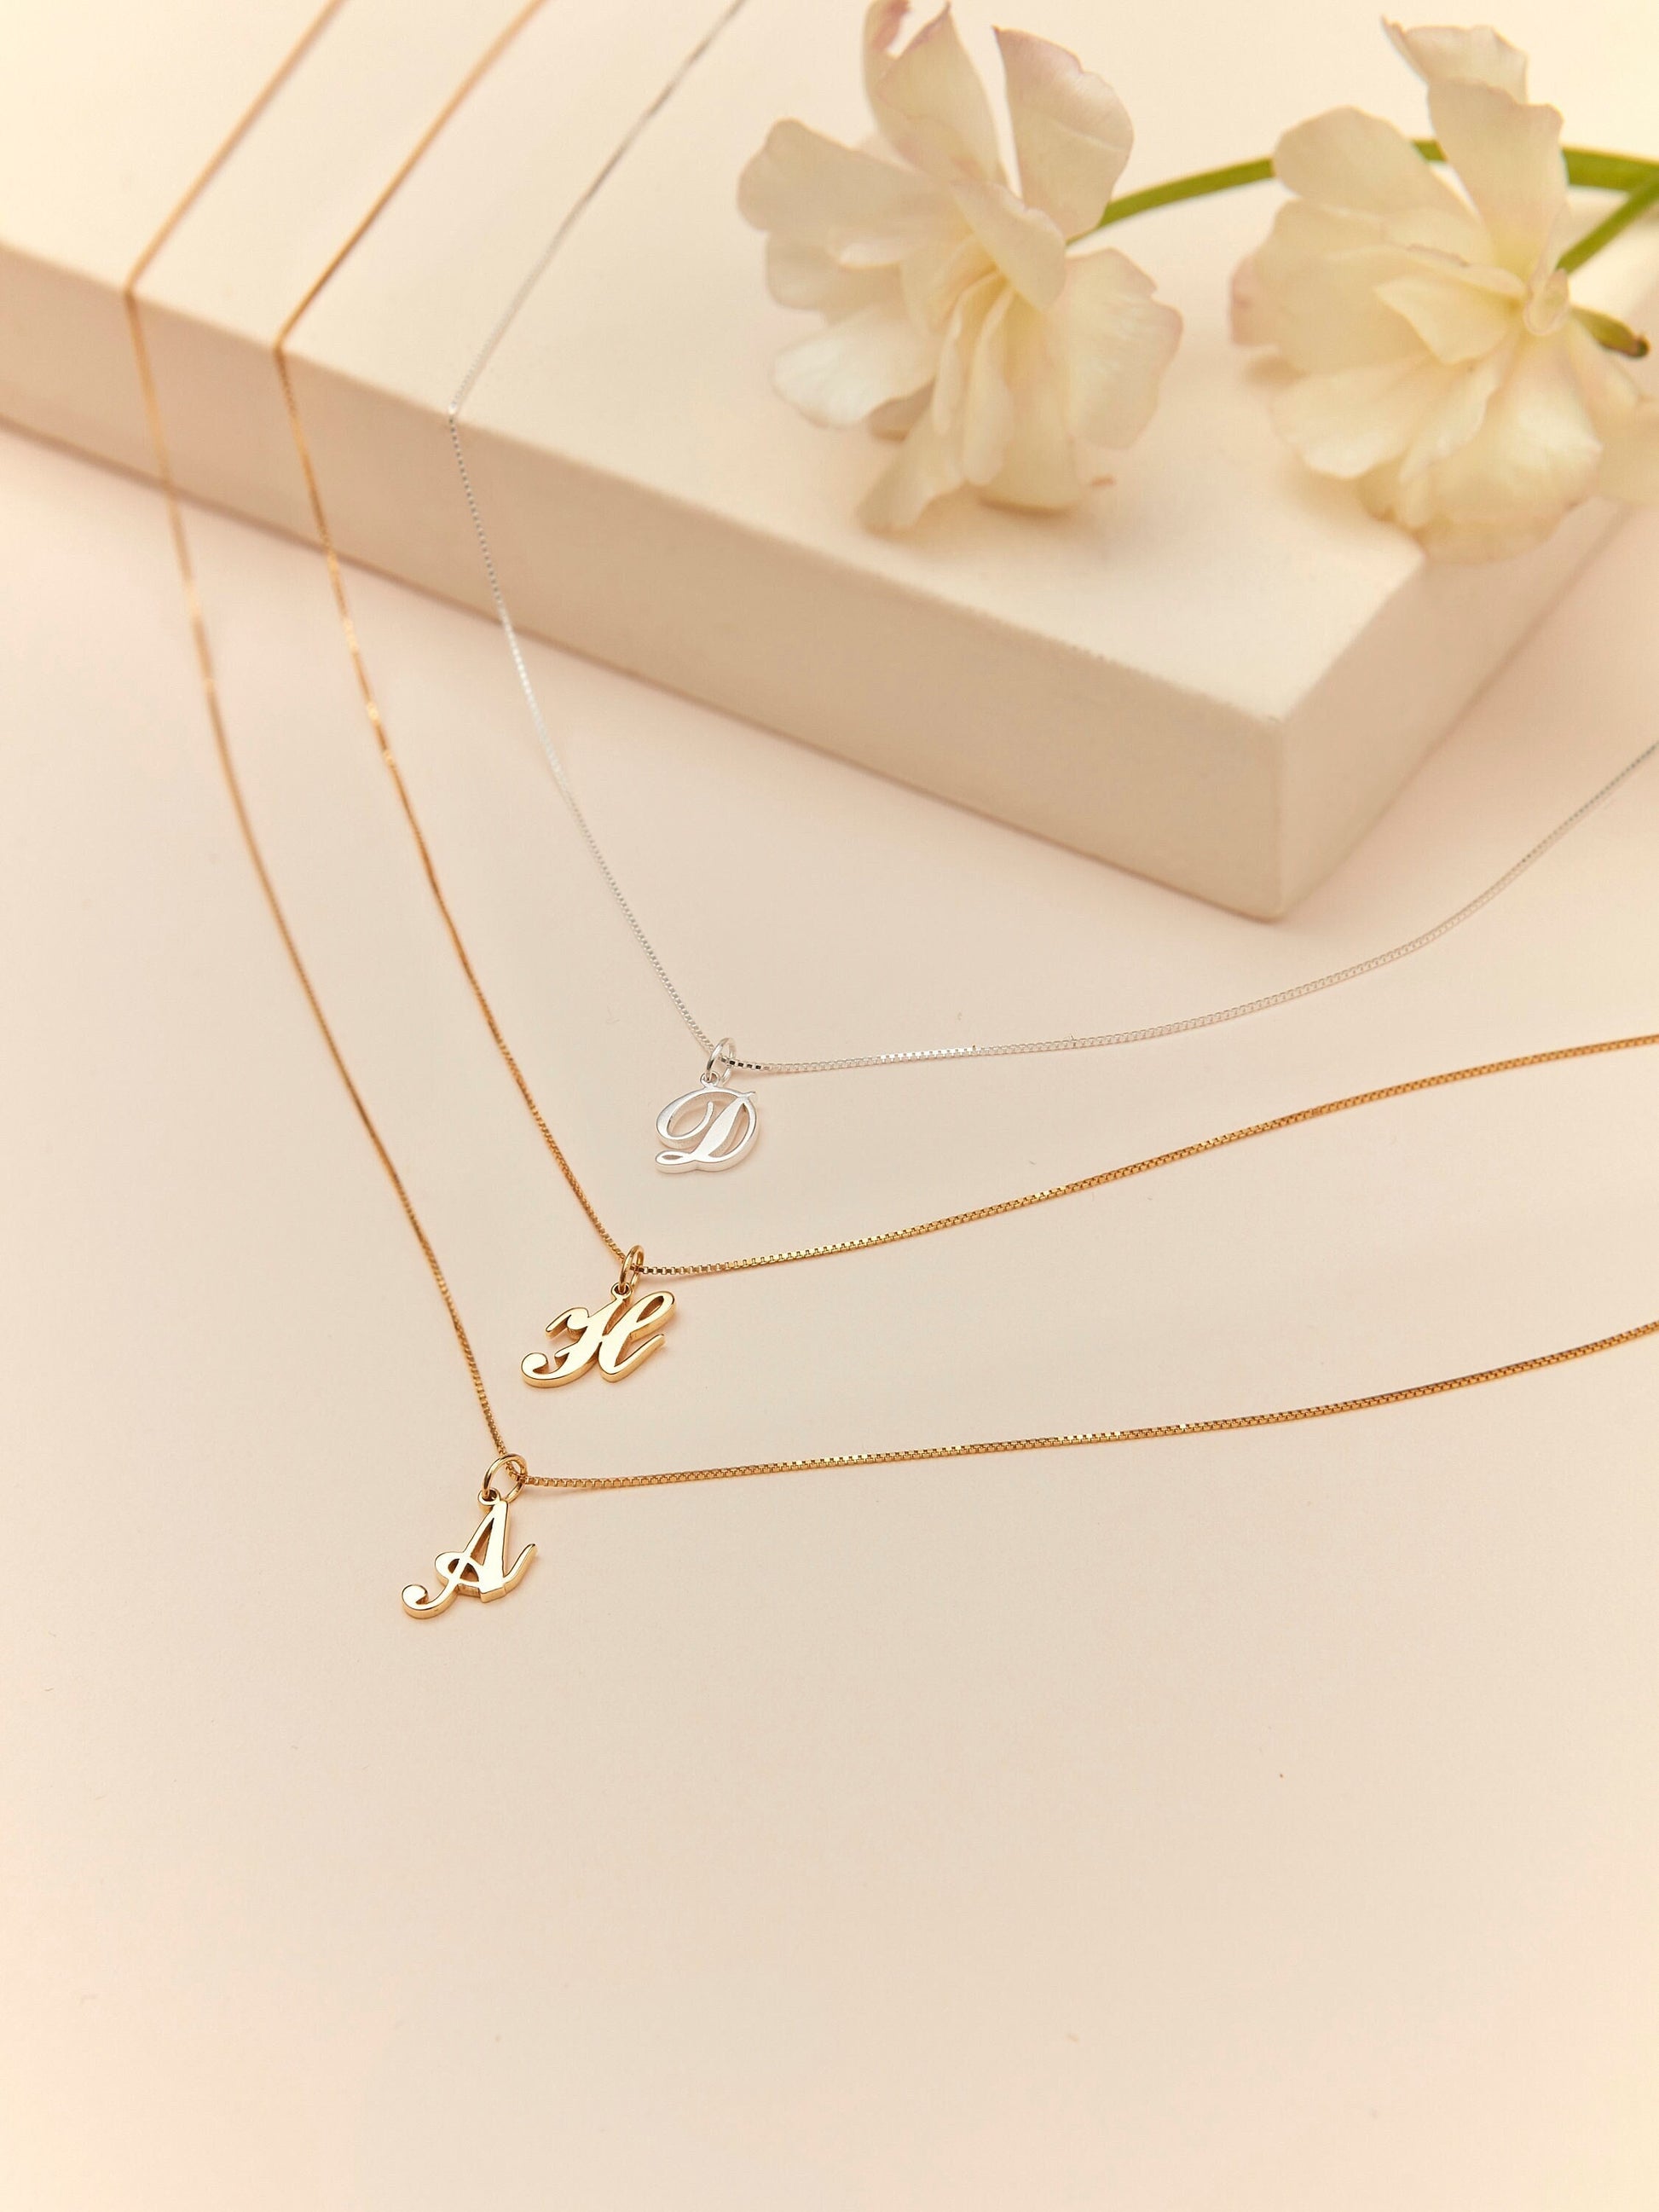 Ready To Ship| Mother's Day Gift| Letter Necklace | Custom Initial Necklace | Initial Charm Necklace | Personalized Gift